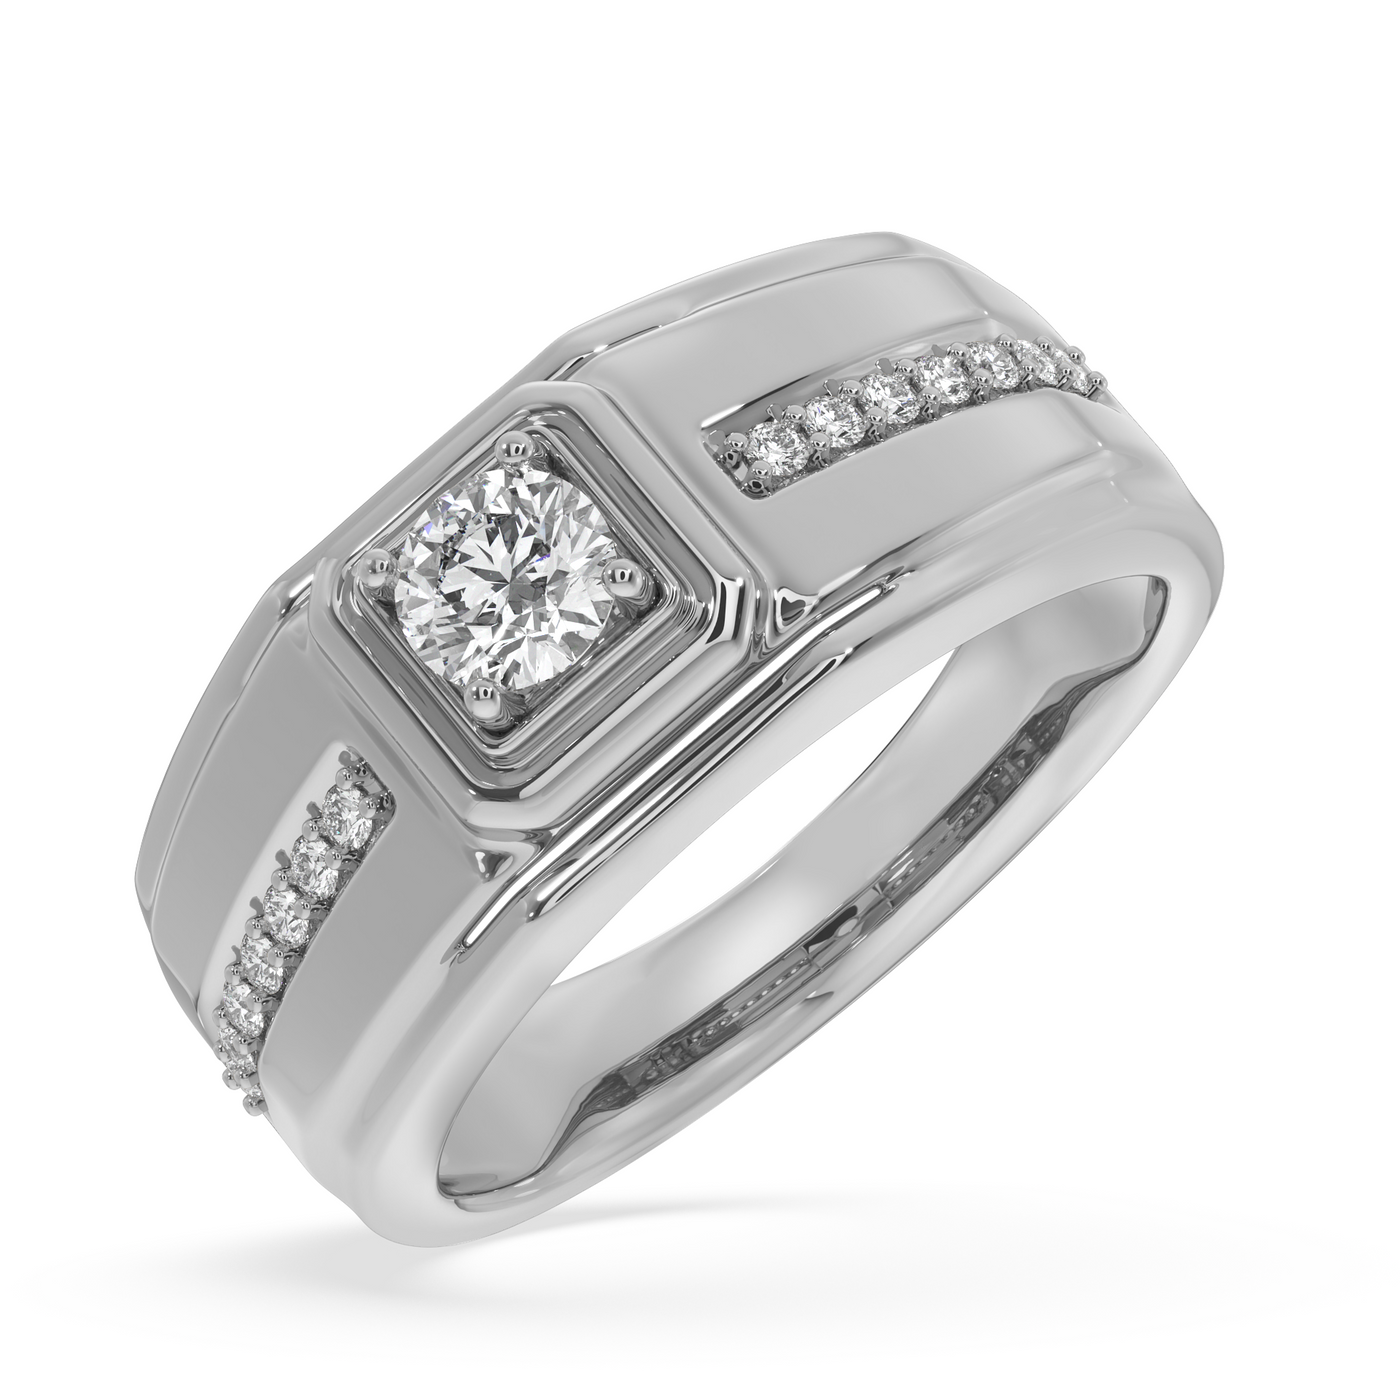 SY Men's Ring in Platinum,  Solitaire Band